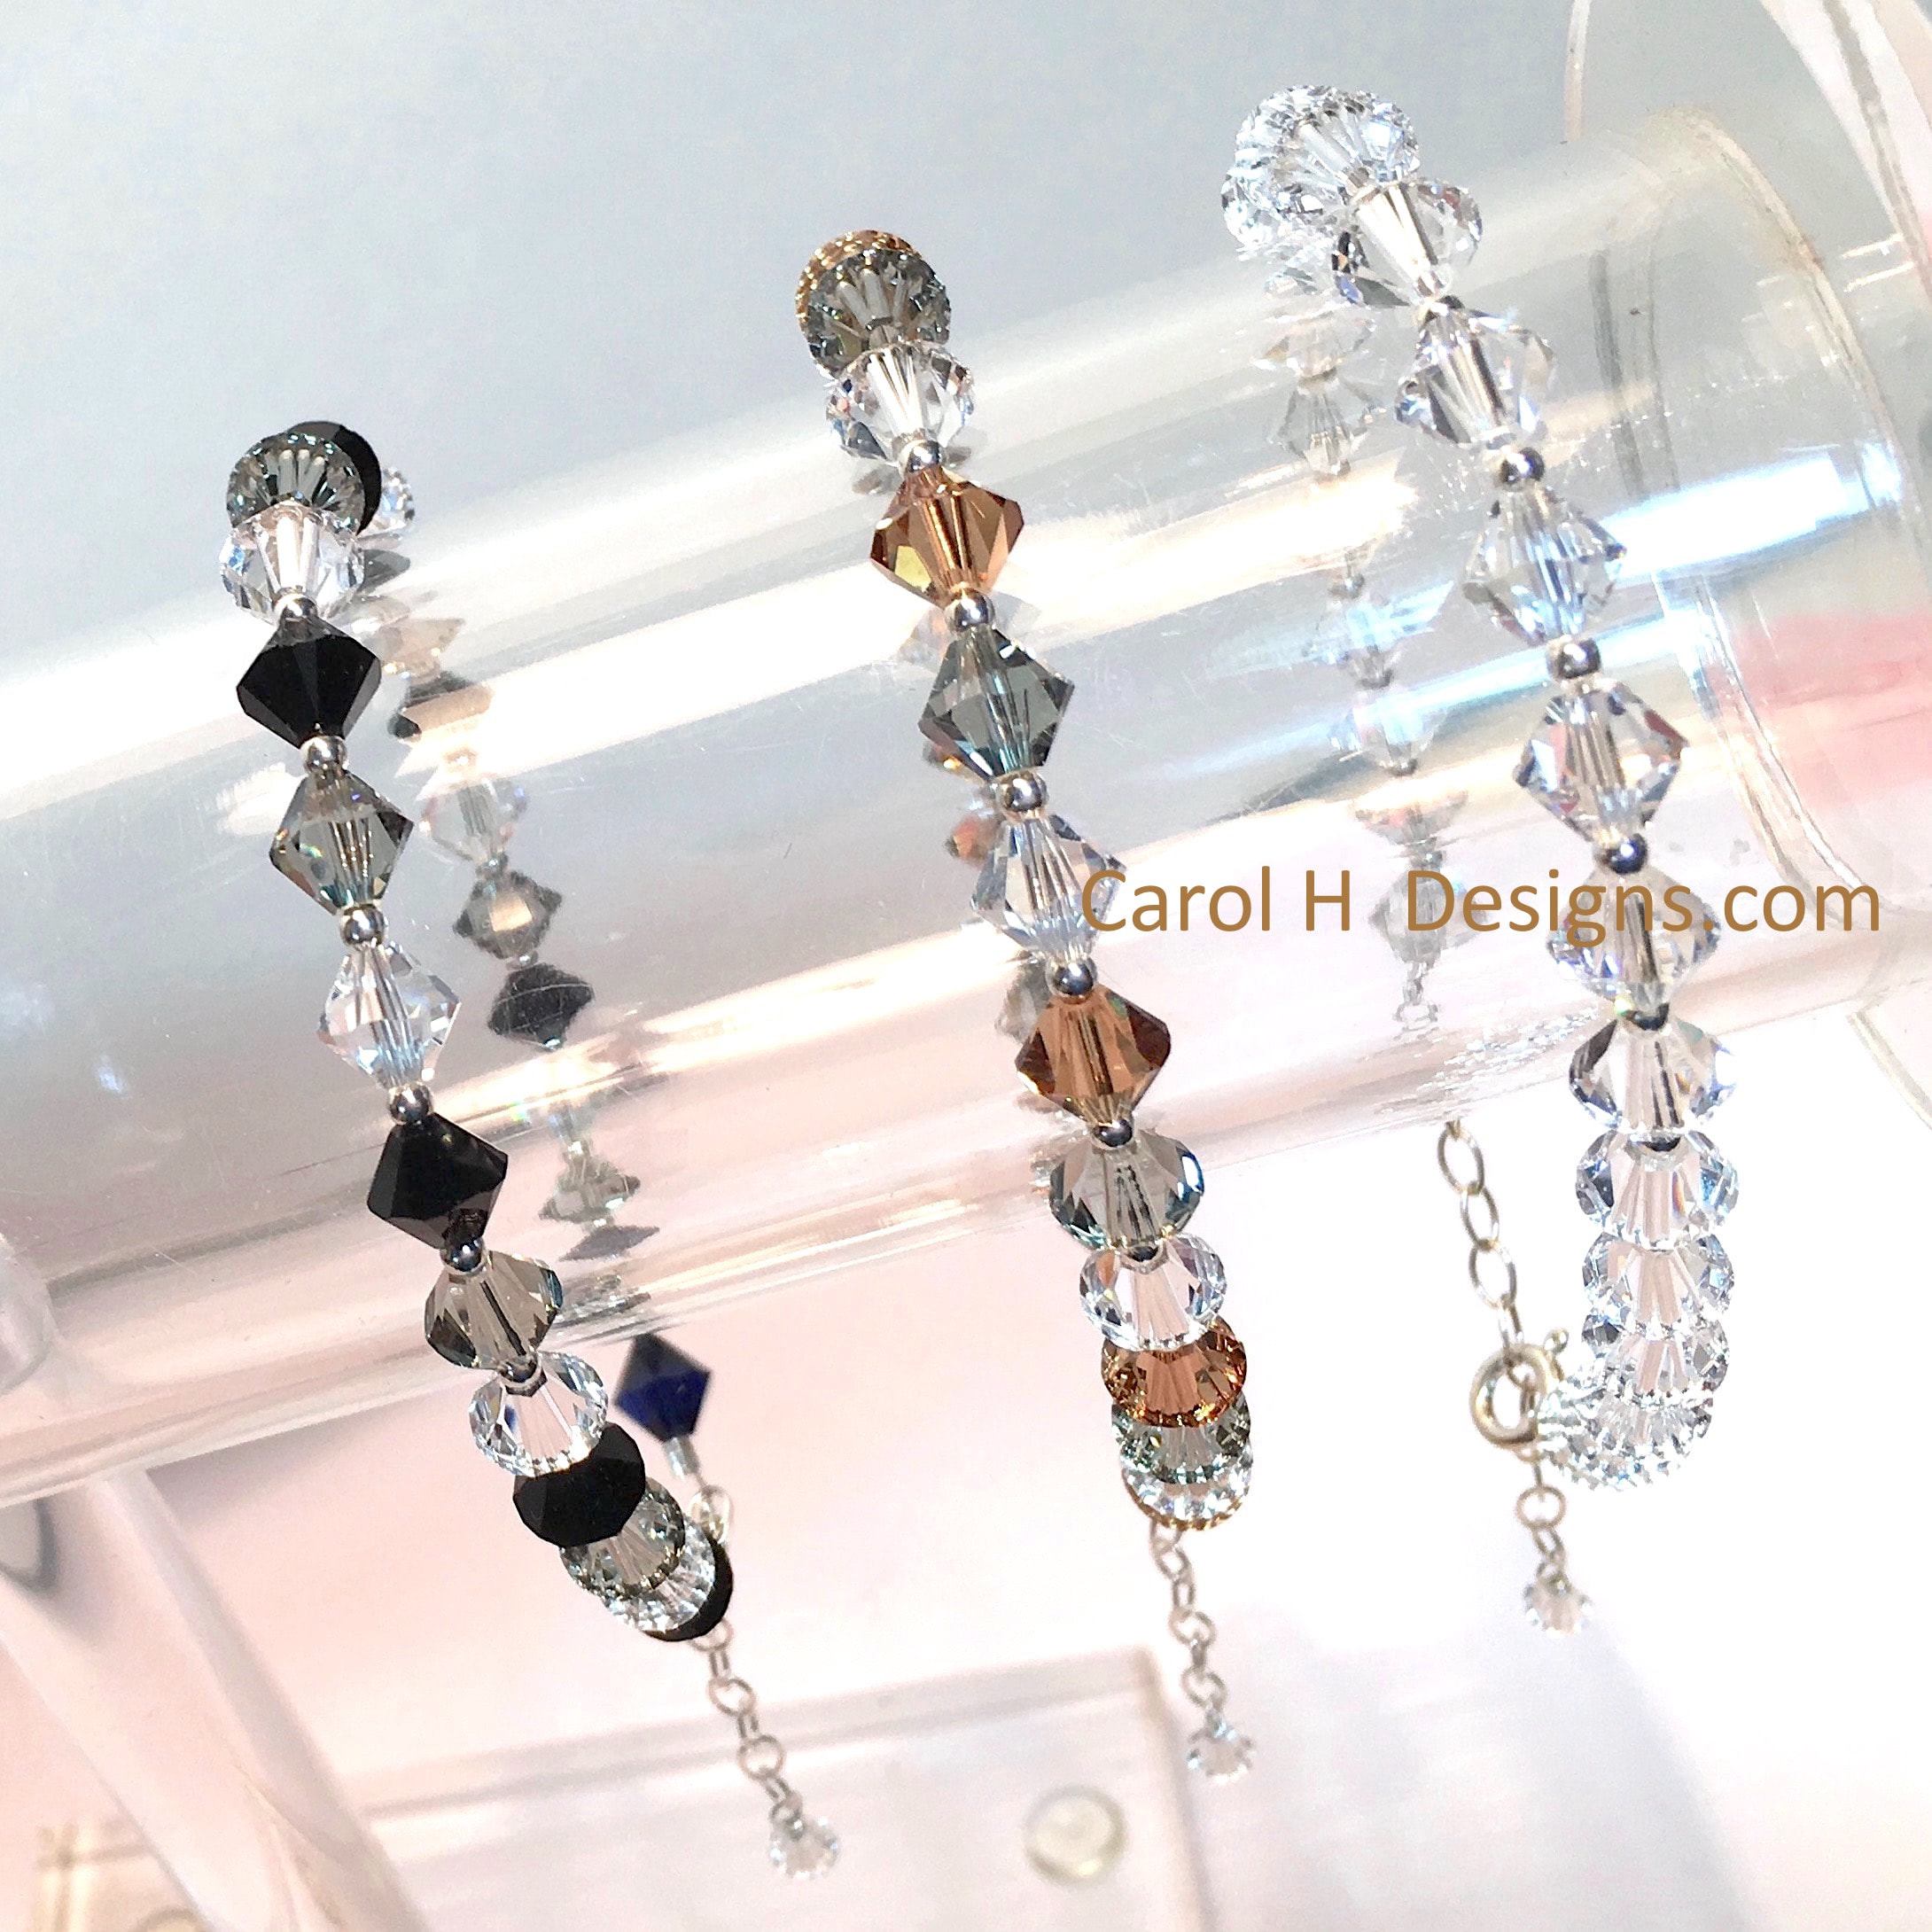 Crystal Bead Bracelet with Sterling Silver